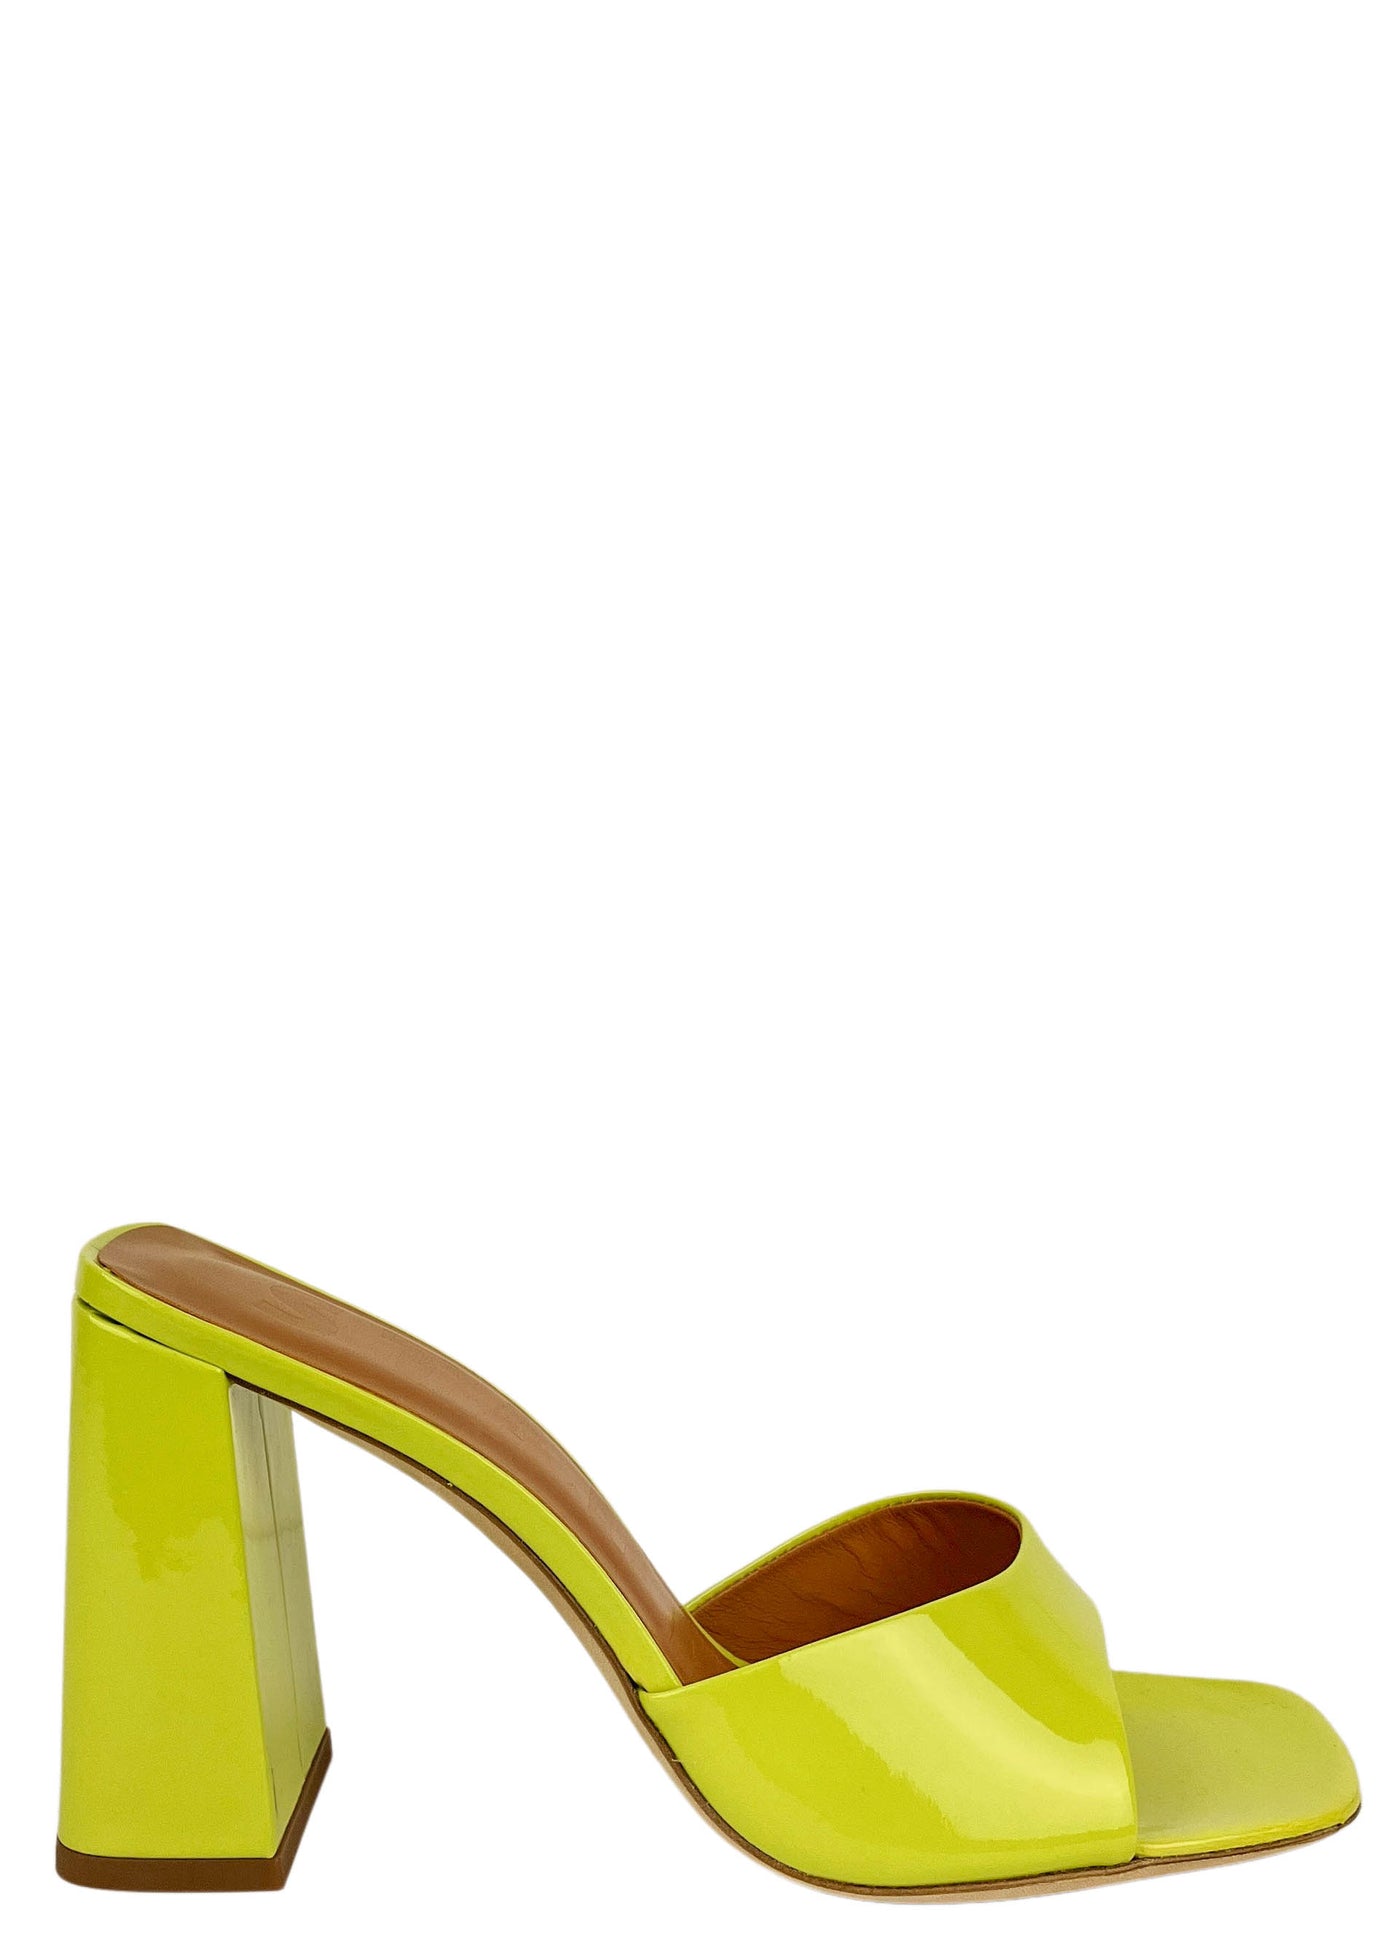 Staud Sloane Heels in Citron Patent Leather - Discounts on Paul Andrew at UAL